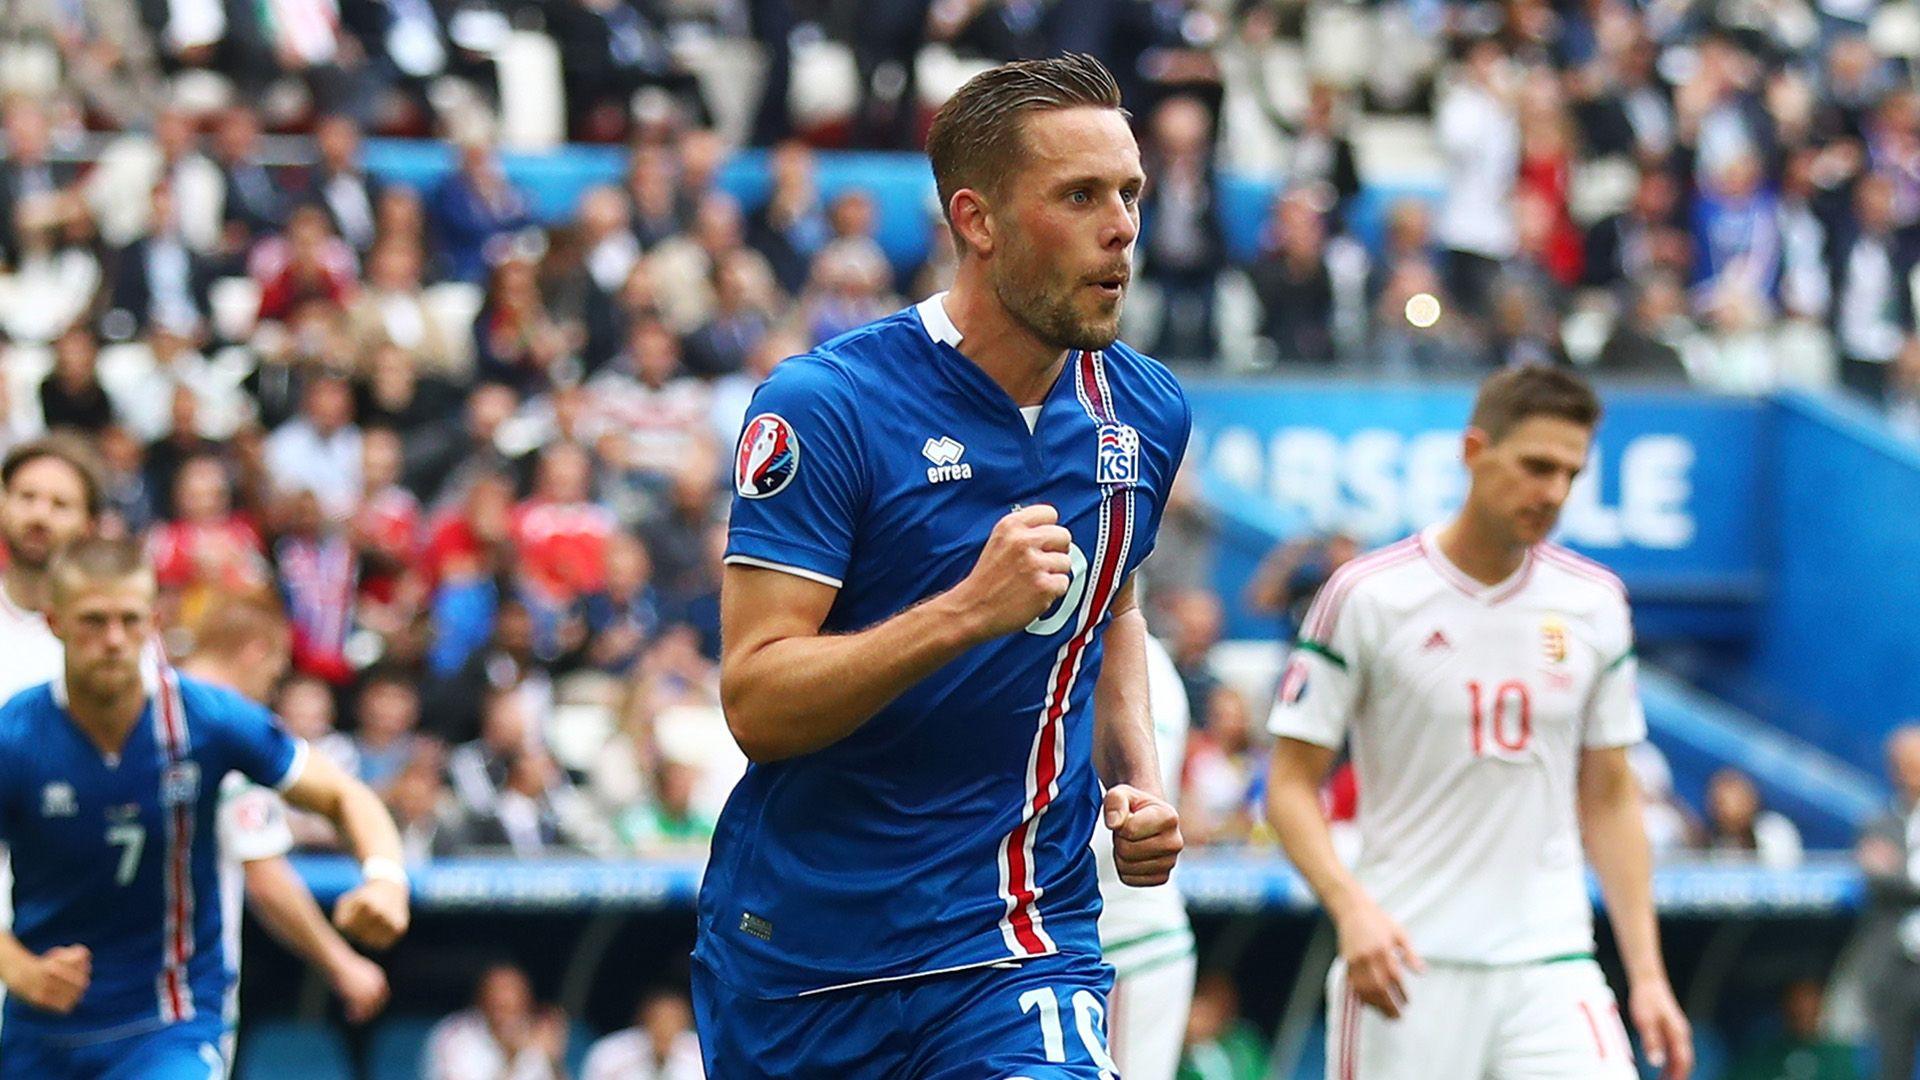 The Iceland Stars Who Could Earn Big Money Moves This Summer